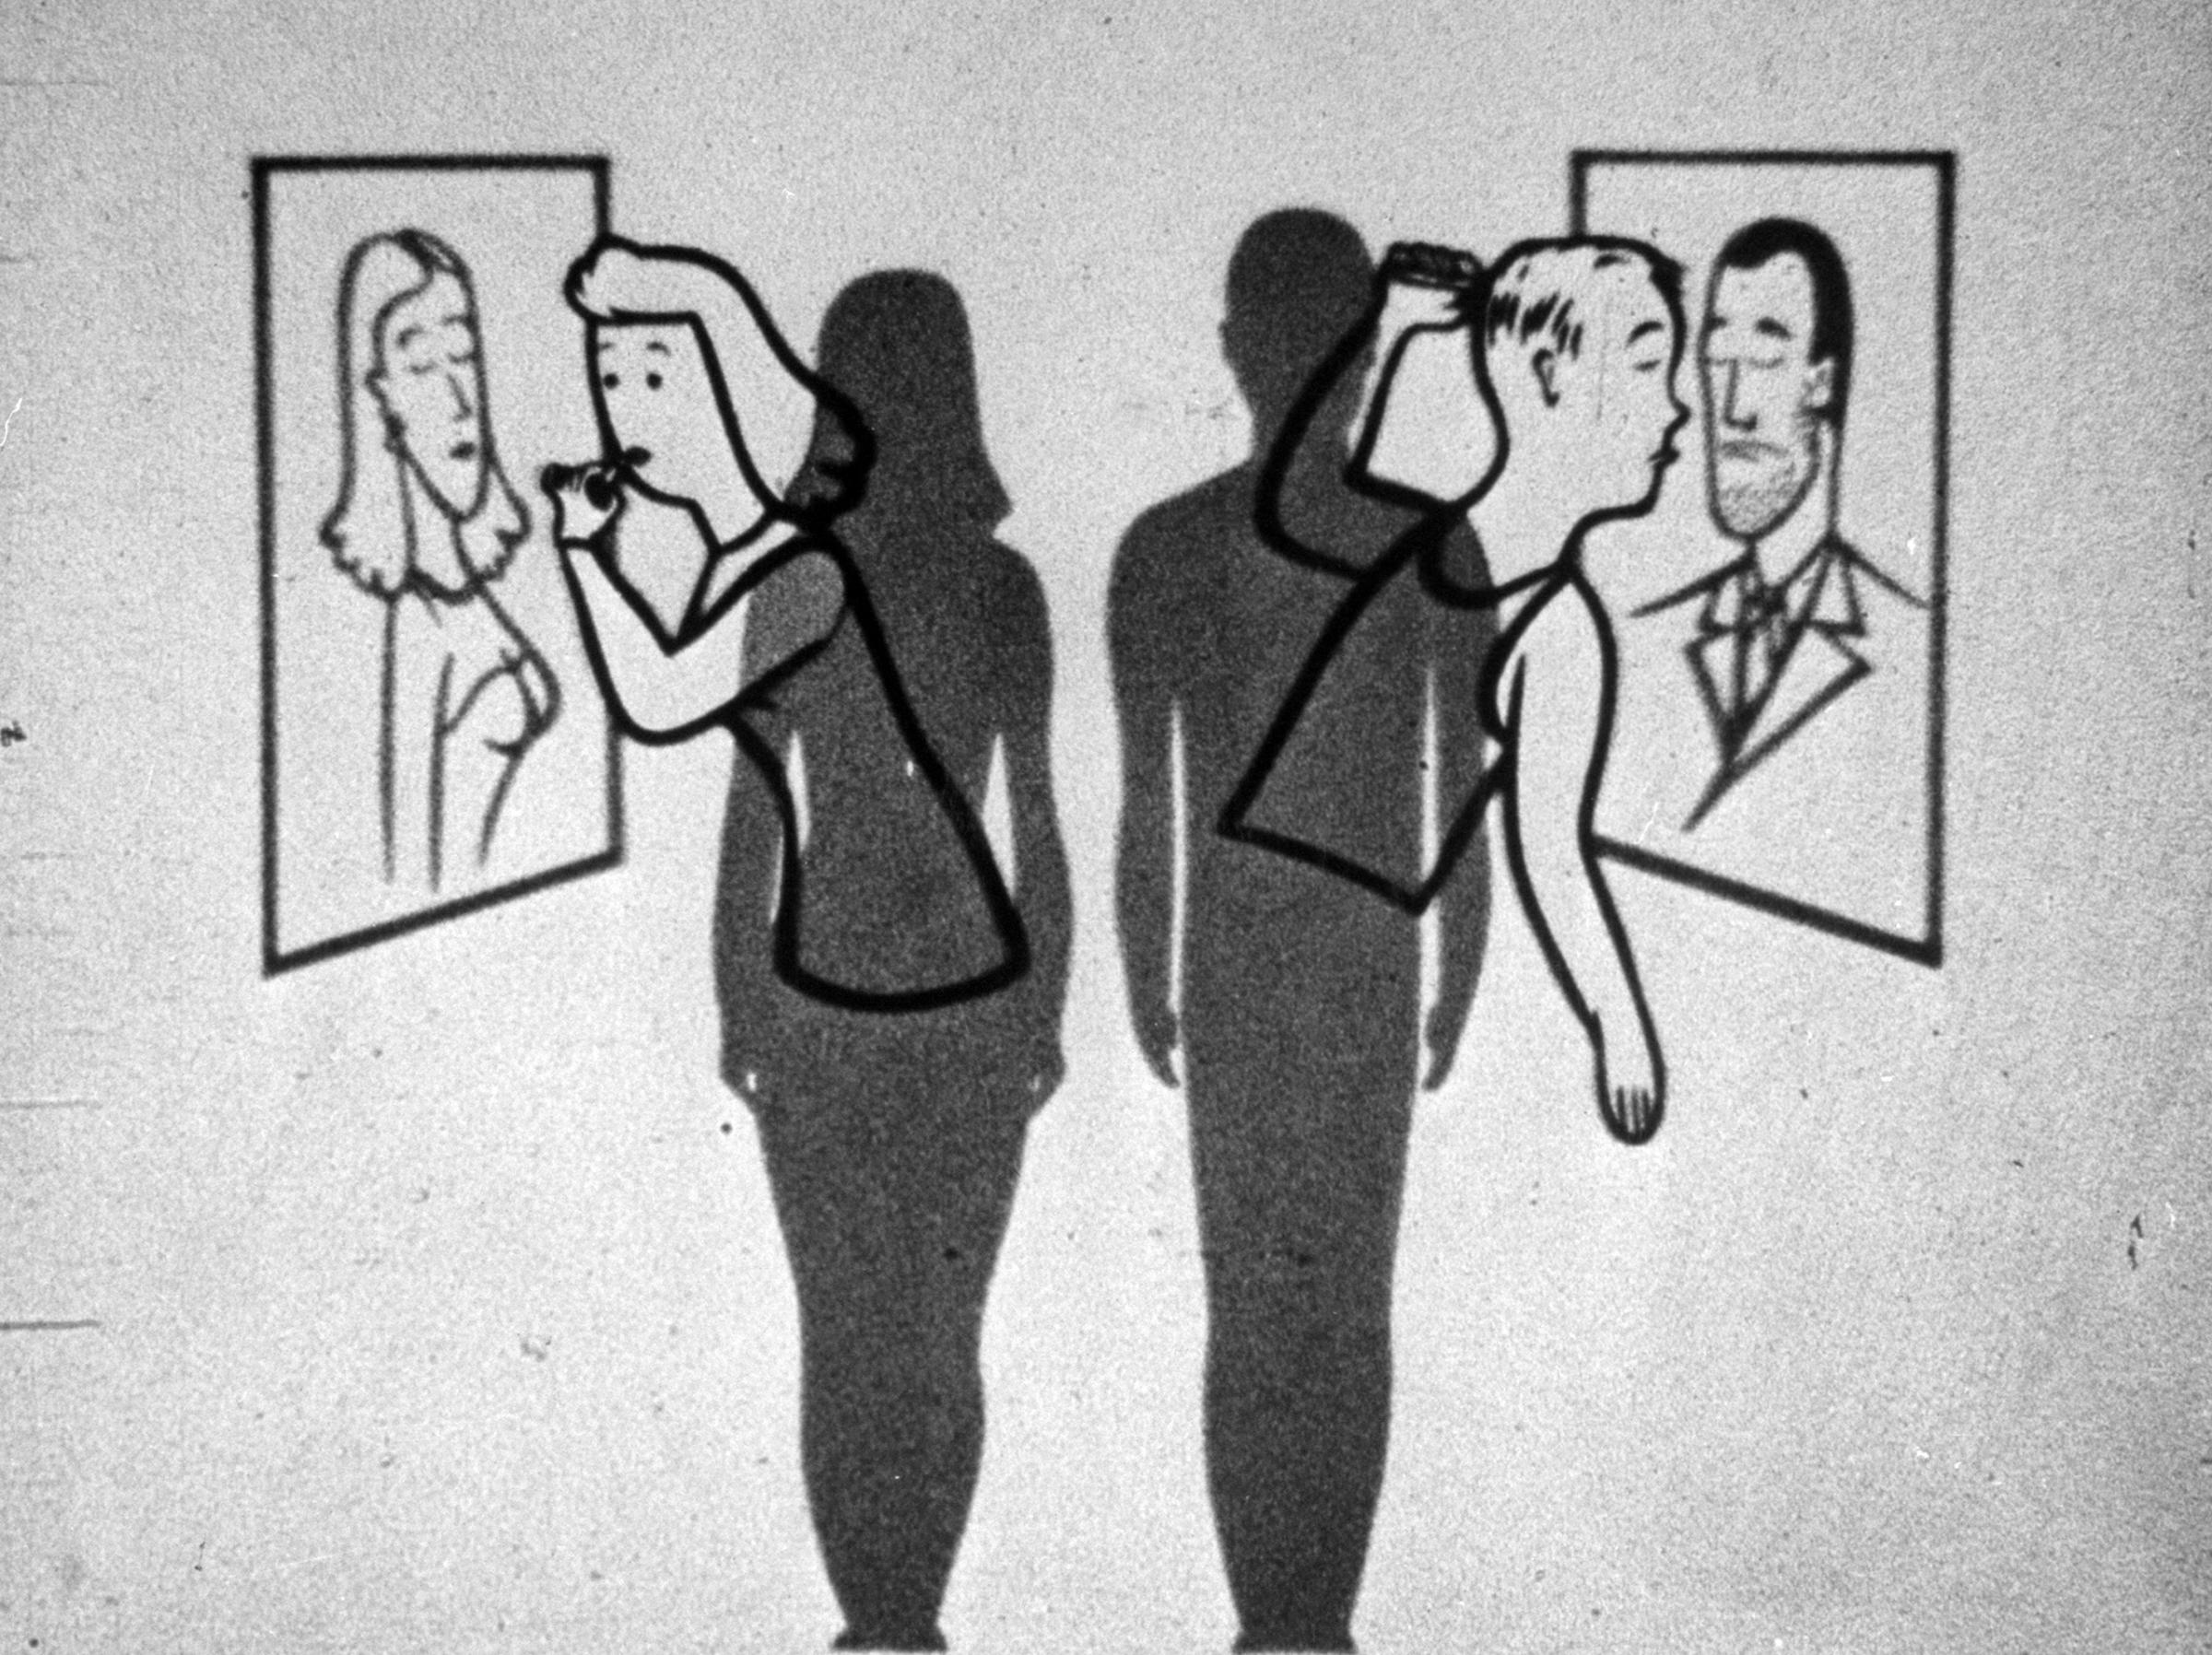 Slide from a sex education film, 1948